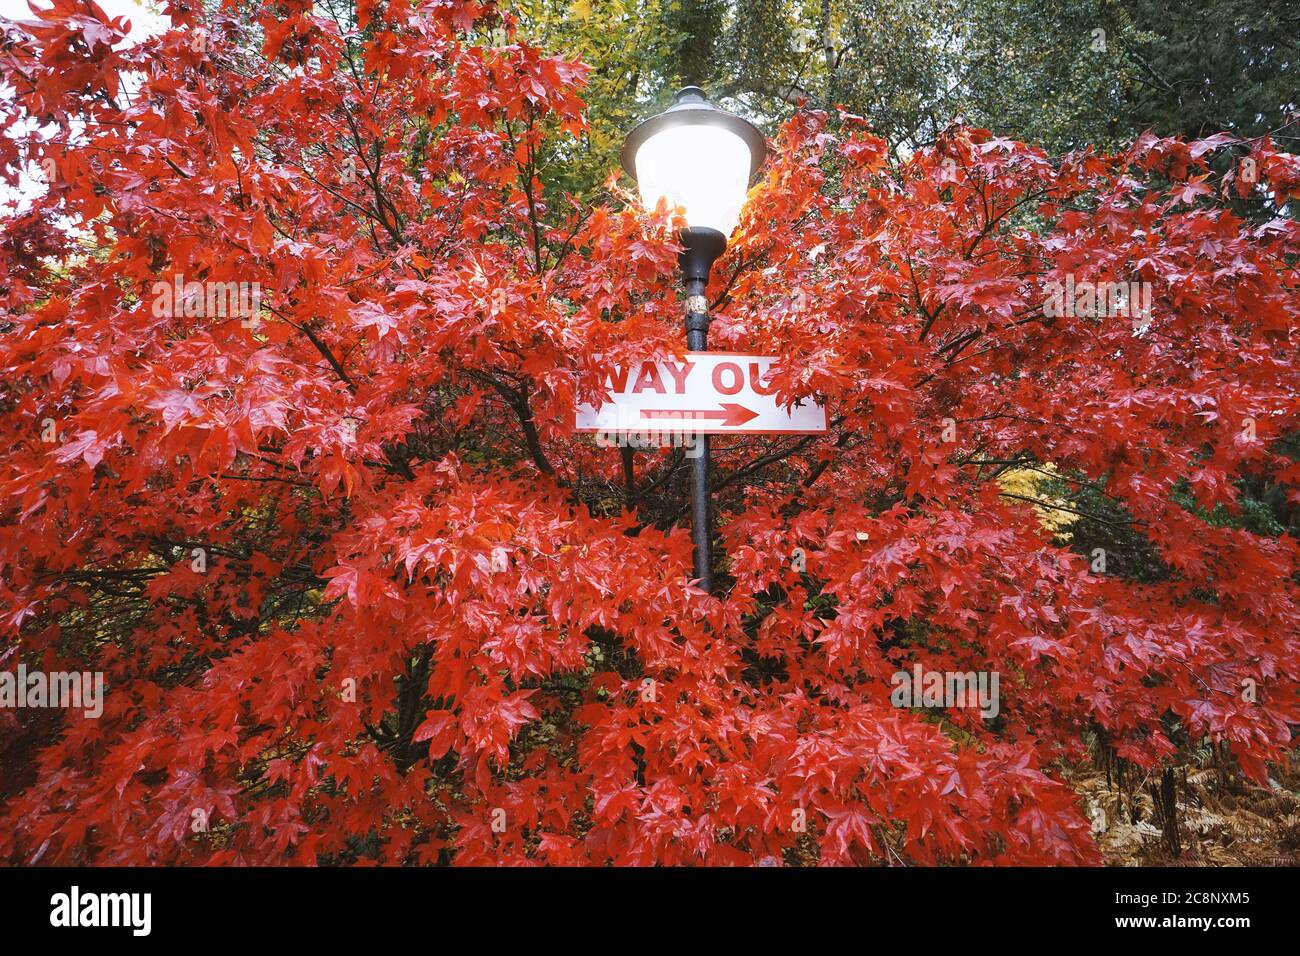 way out signal on a lamp submerged in red maple leaves, dublin Stock Photo